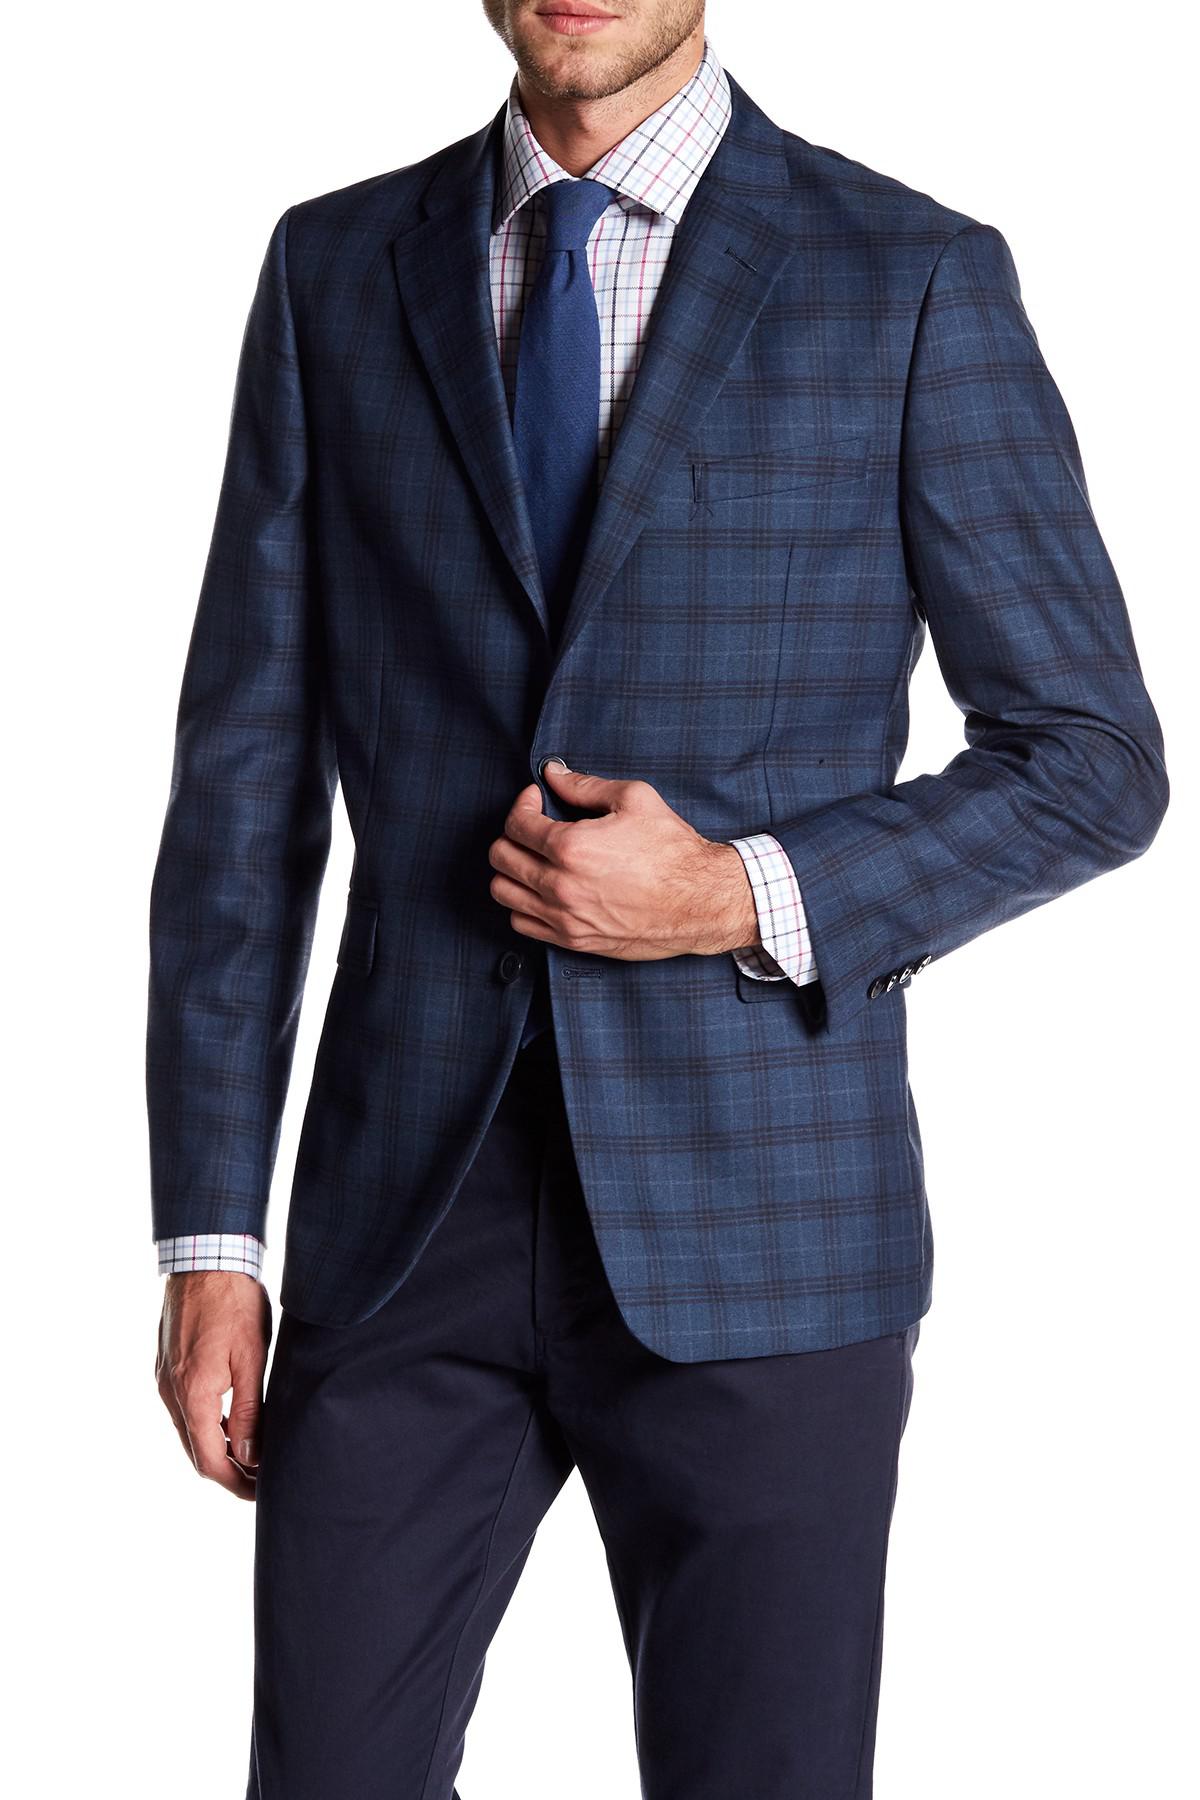 Lyst - Tommy Hilfiger Blue Plaid Classic Fit Sportscoat in Blue for Men